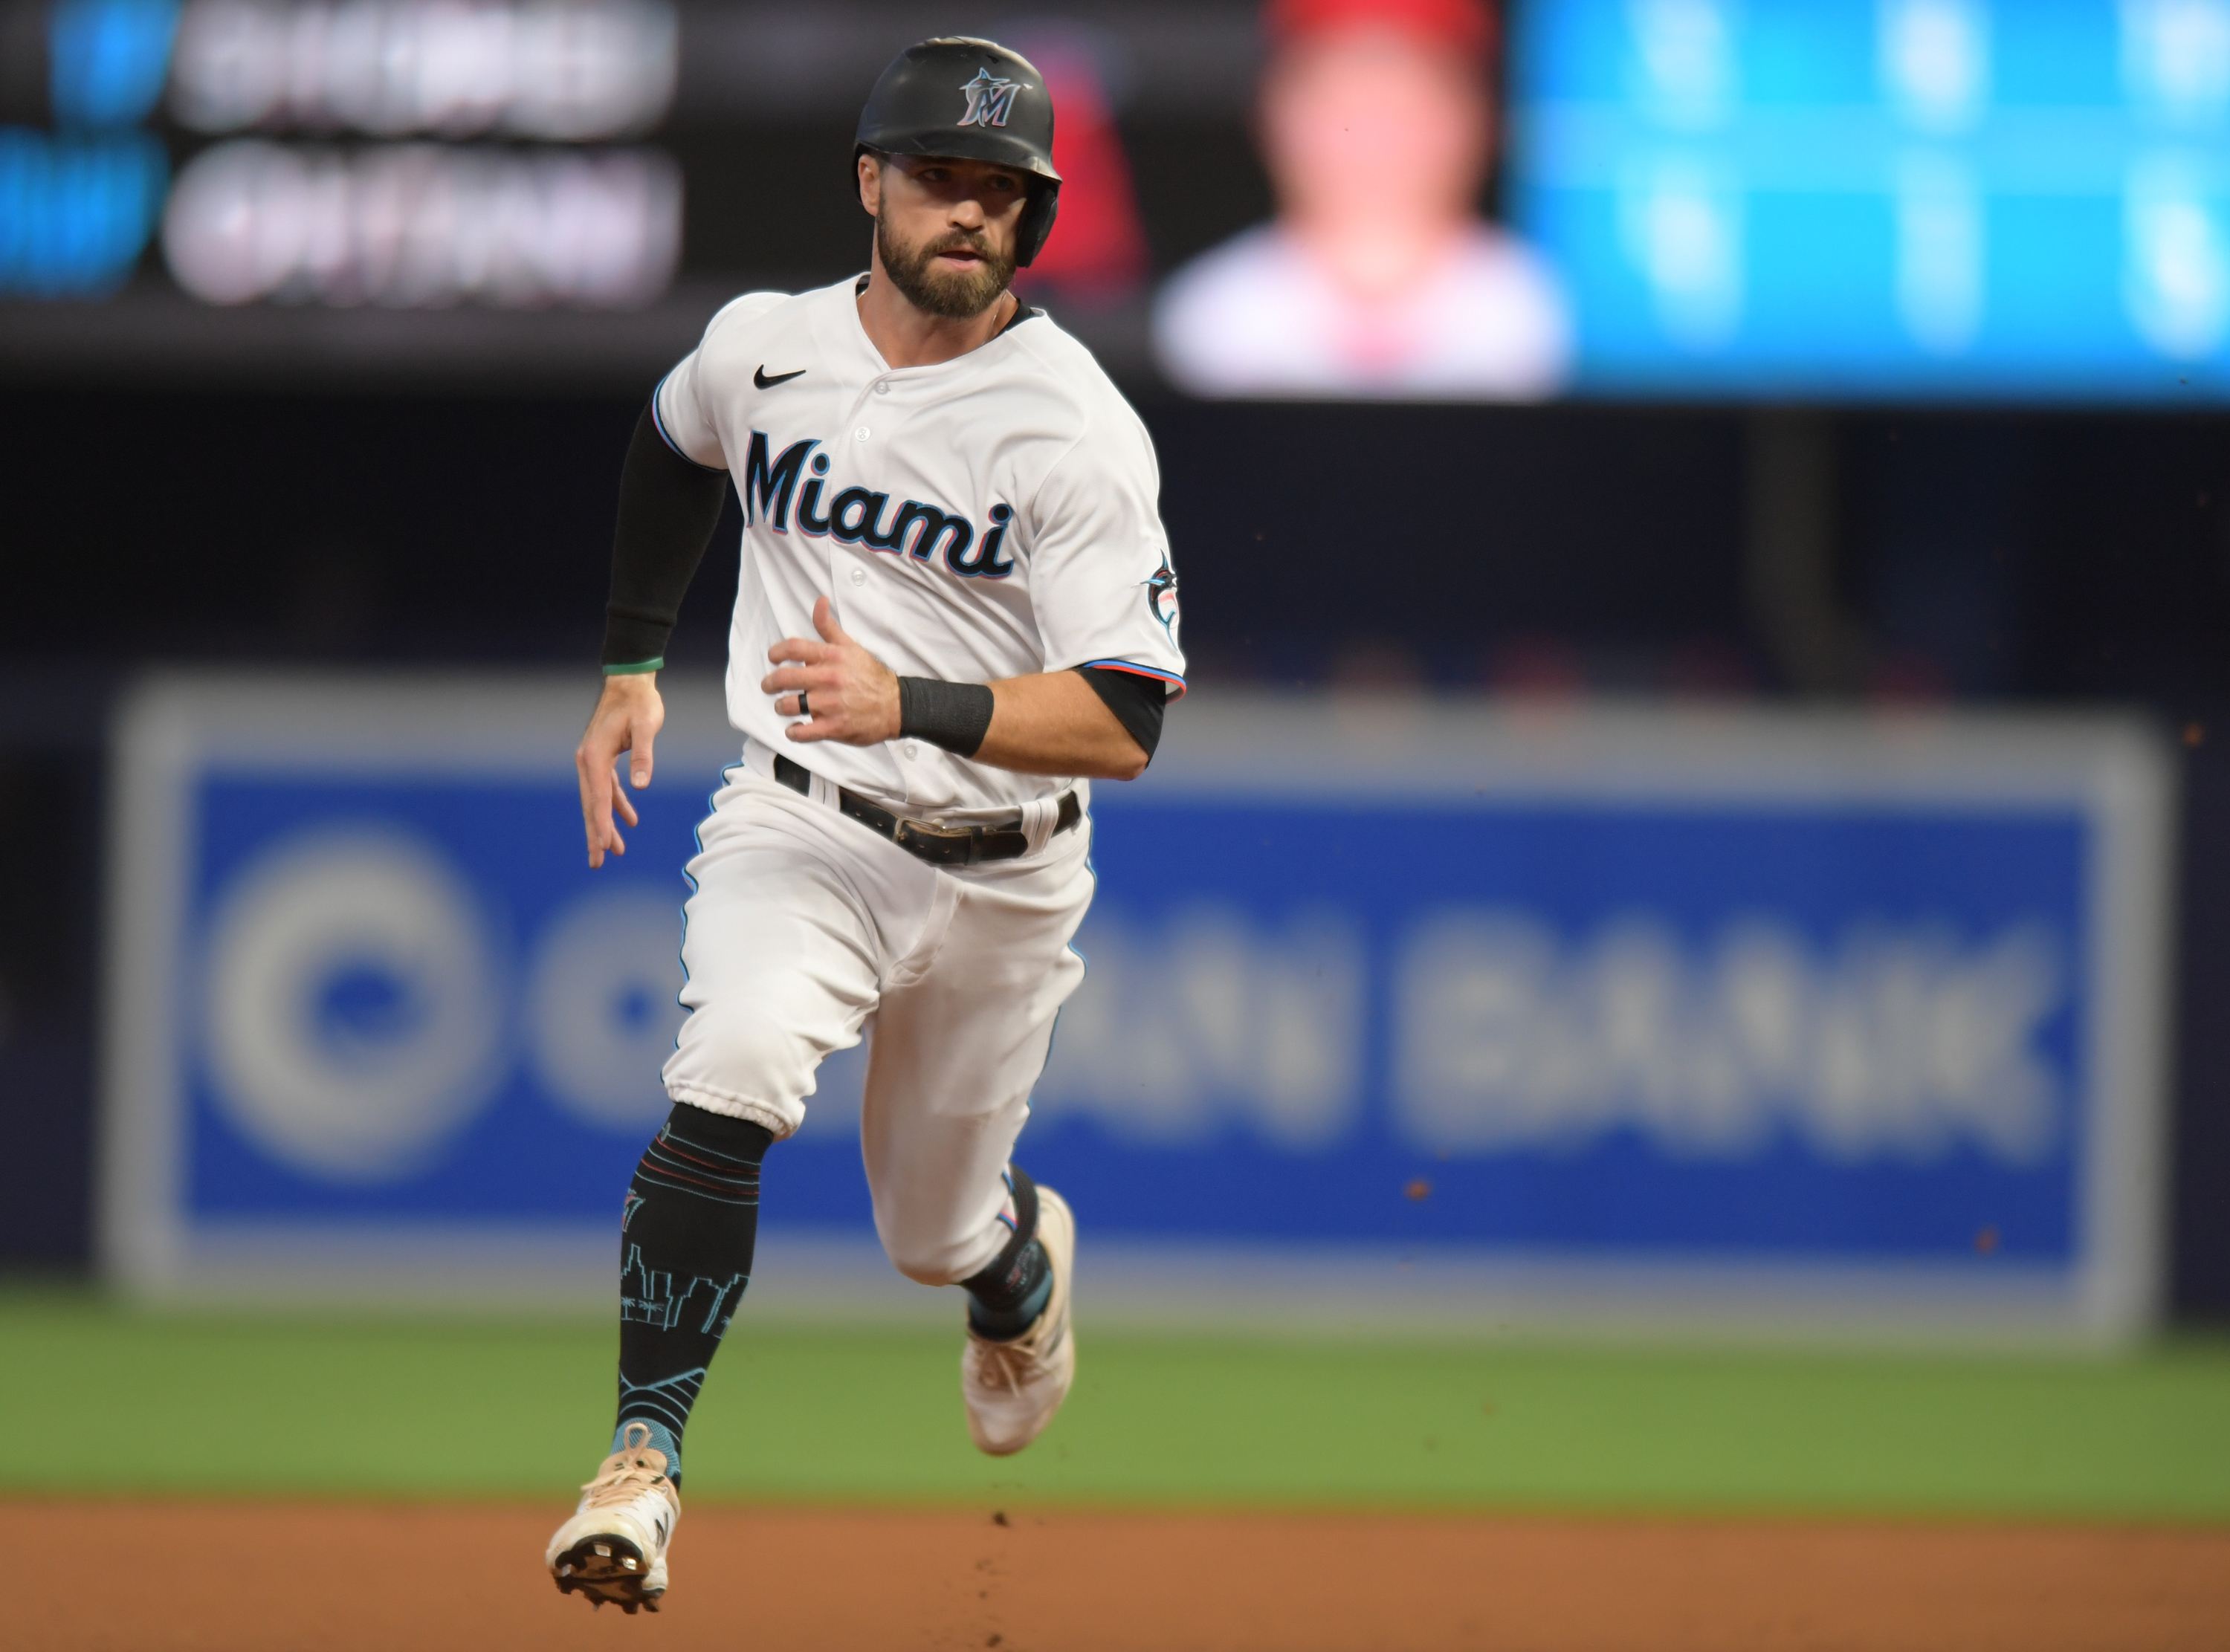 Miami Marlins third baseman Jon Berti (5) heads for third base in the first inning against the Los Angeles Angels at loanDepot Park.